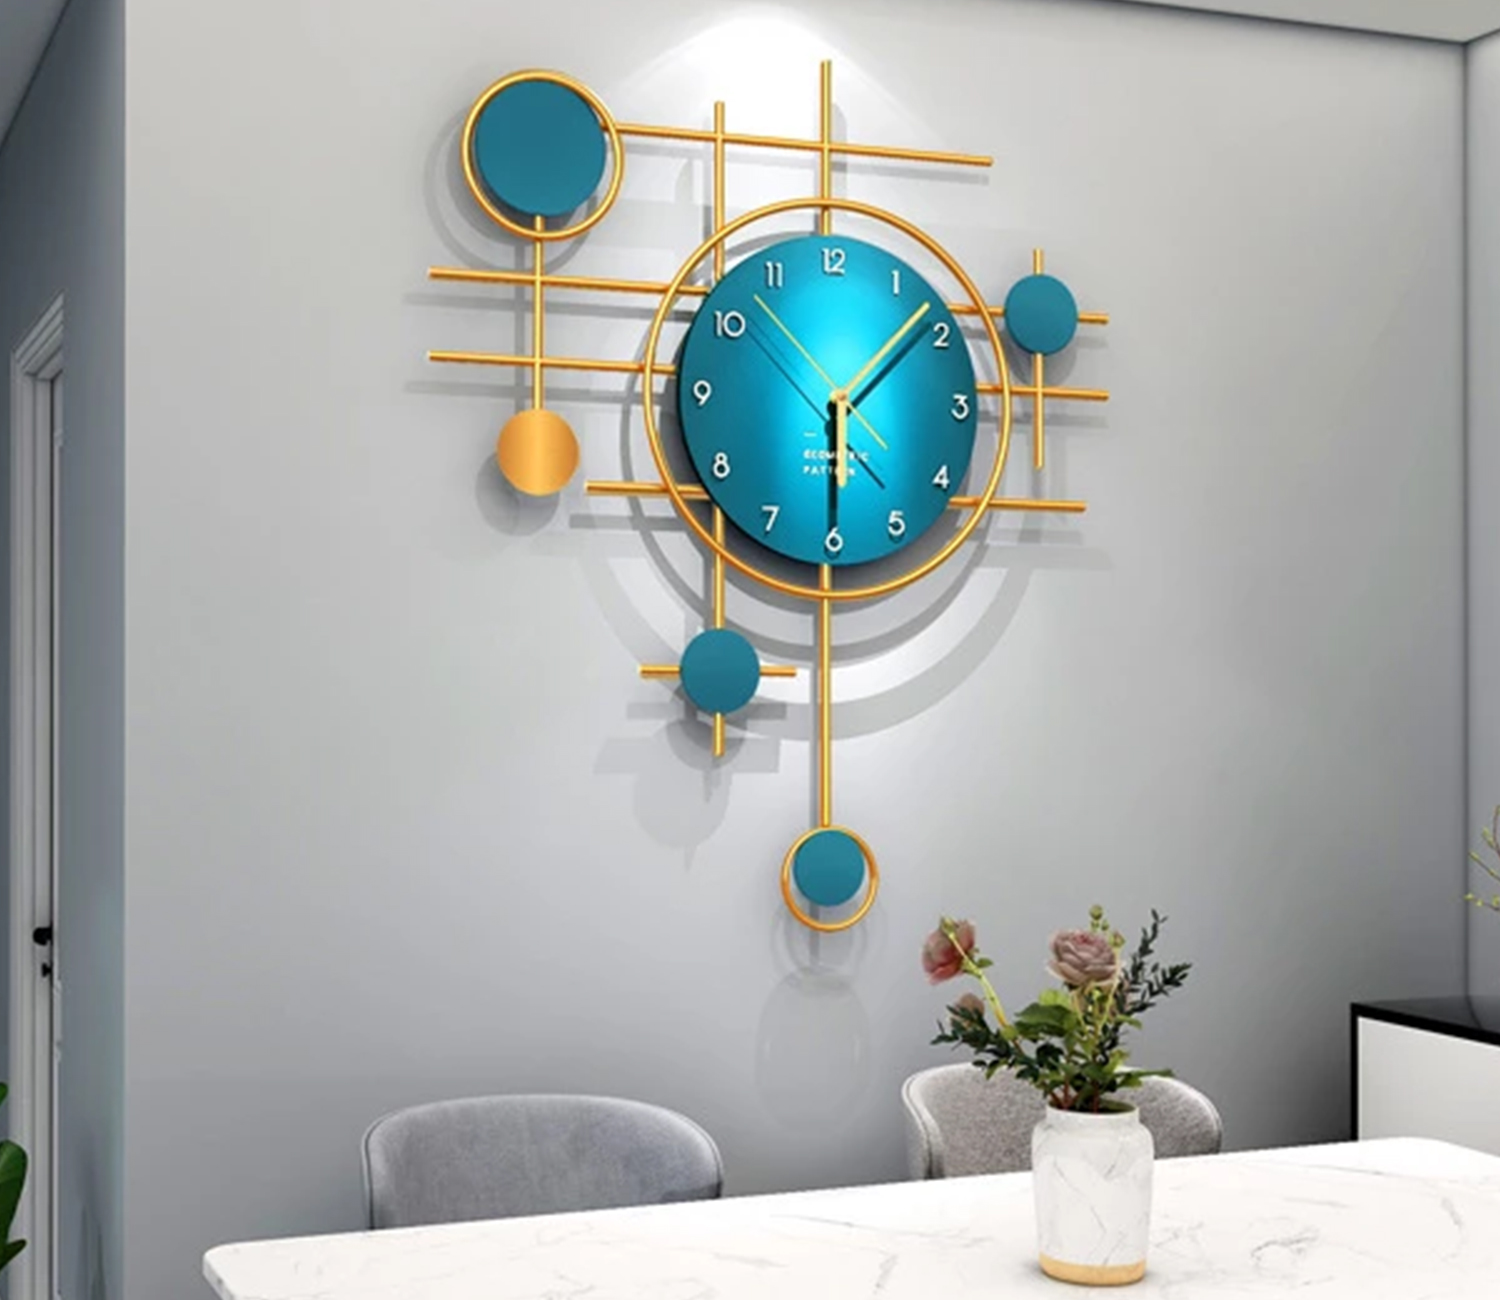 Choosing the Perfect Designer Wall Clock: Different Types and Styles